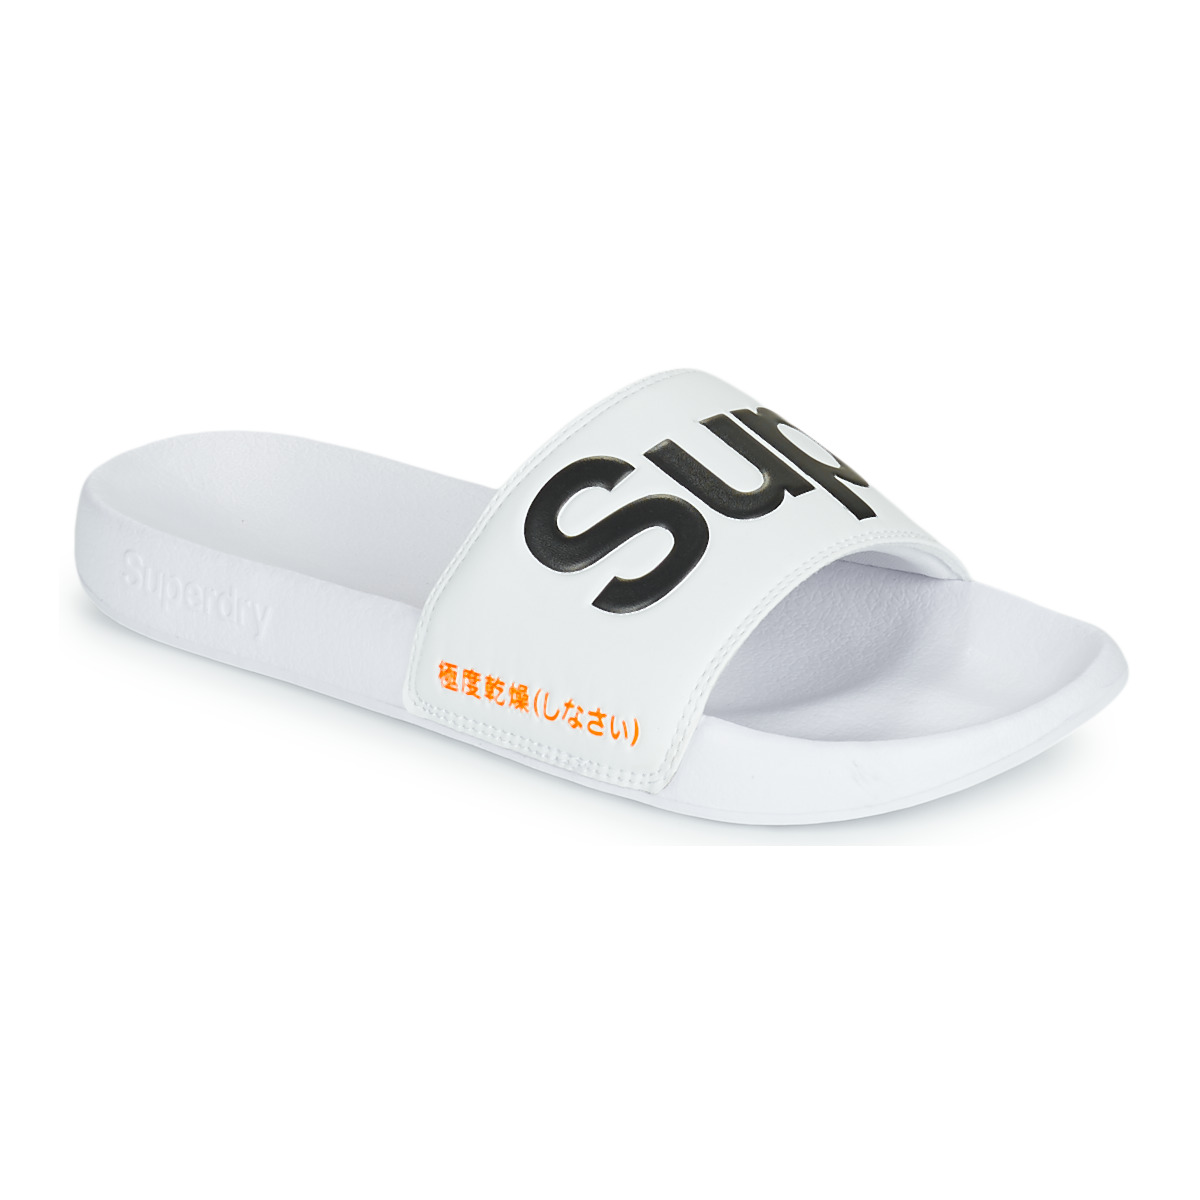 Superdry  CLASSIC SUPERDRY POOL SLIDE  men's  in White. Sizes available:M,S,XL,L